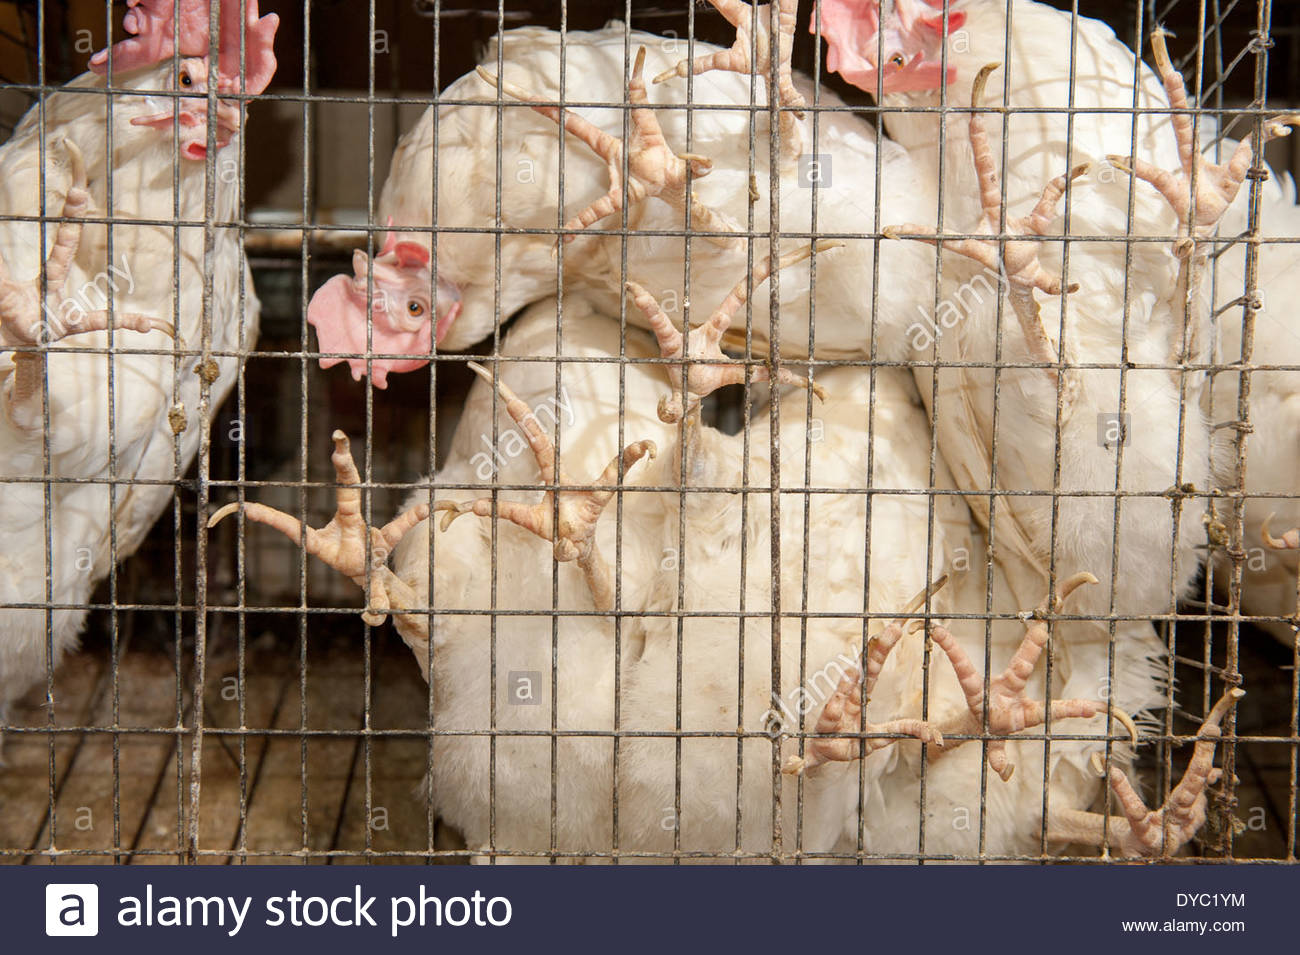 commercial egg production